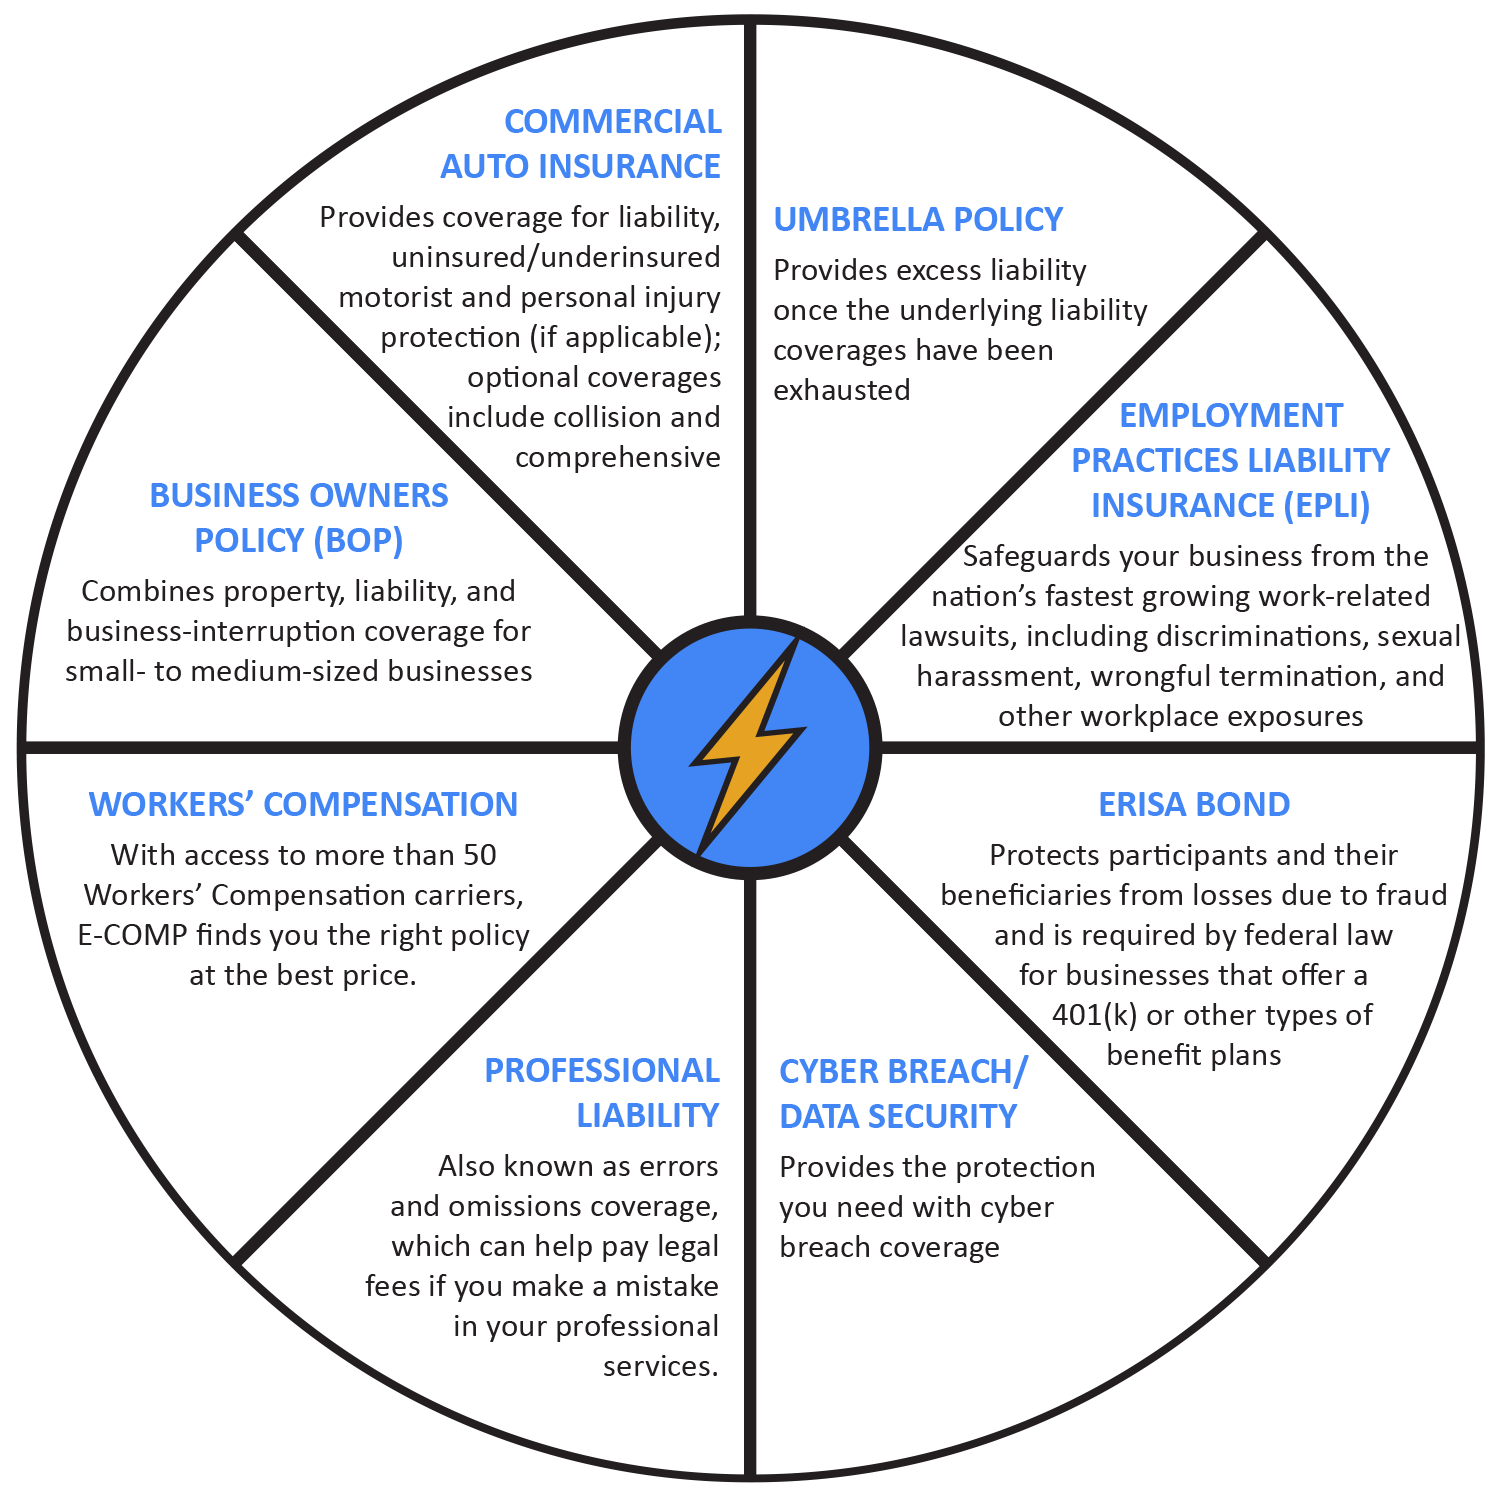 Business Insurance https://coverease.com/wp-content/uploads/2021/07/CoverageWheel_CalibriFont.png